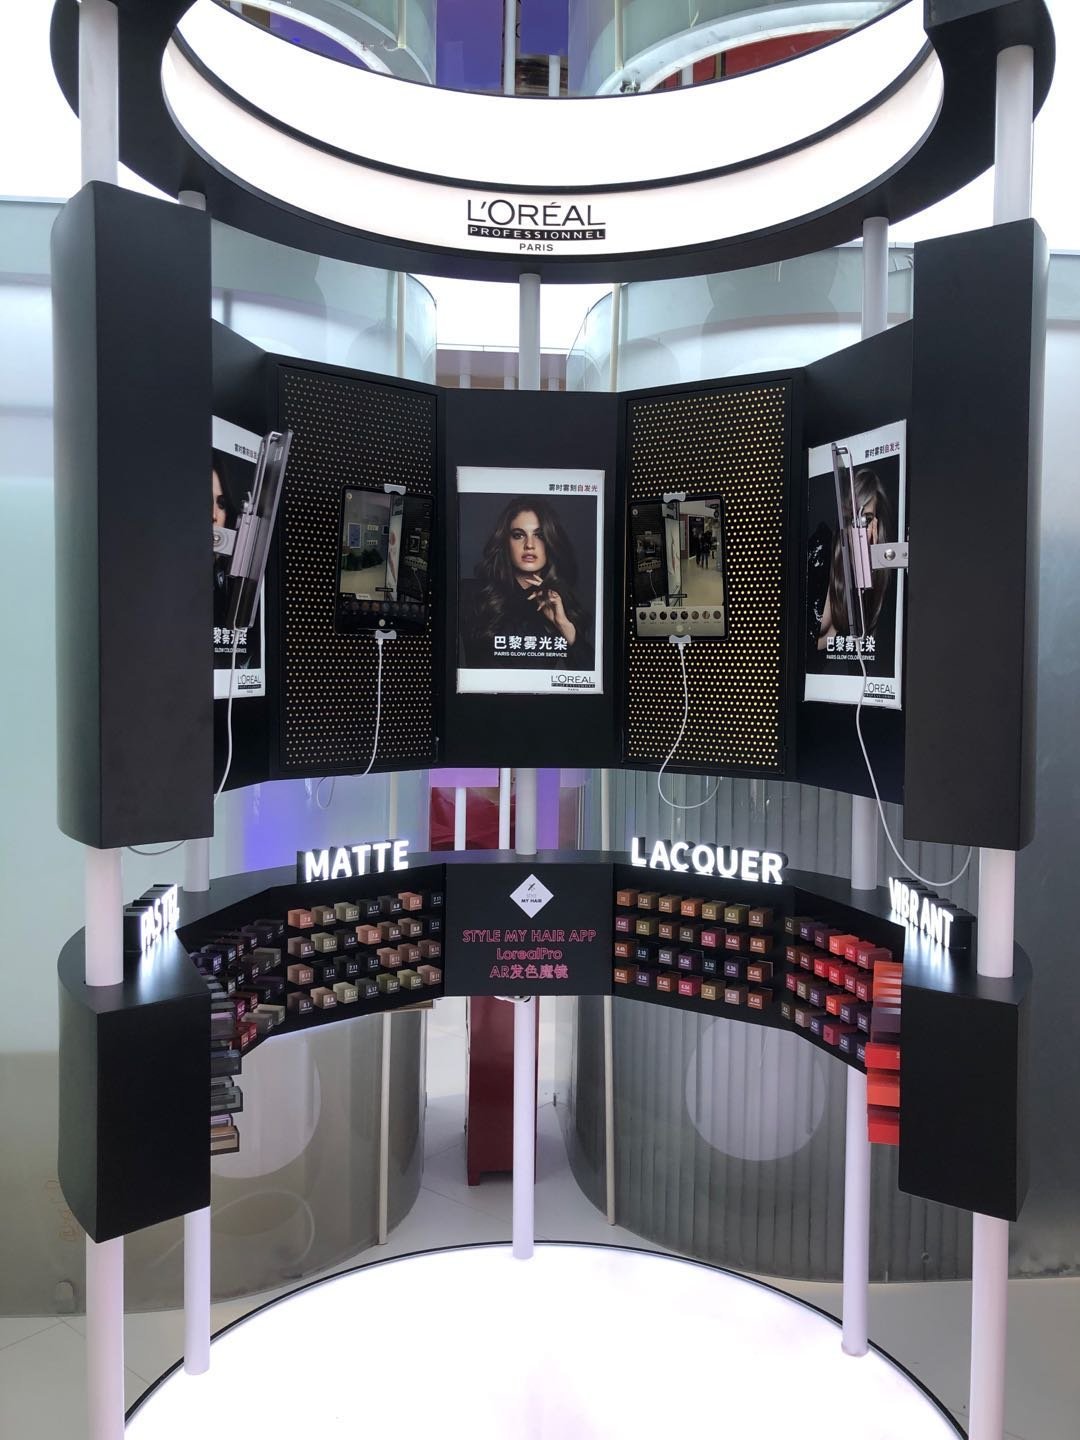 Guangzhou prepares for L'Oreal, Estee Lauder onslaught with